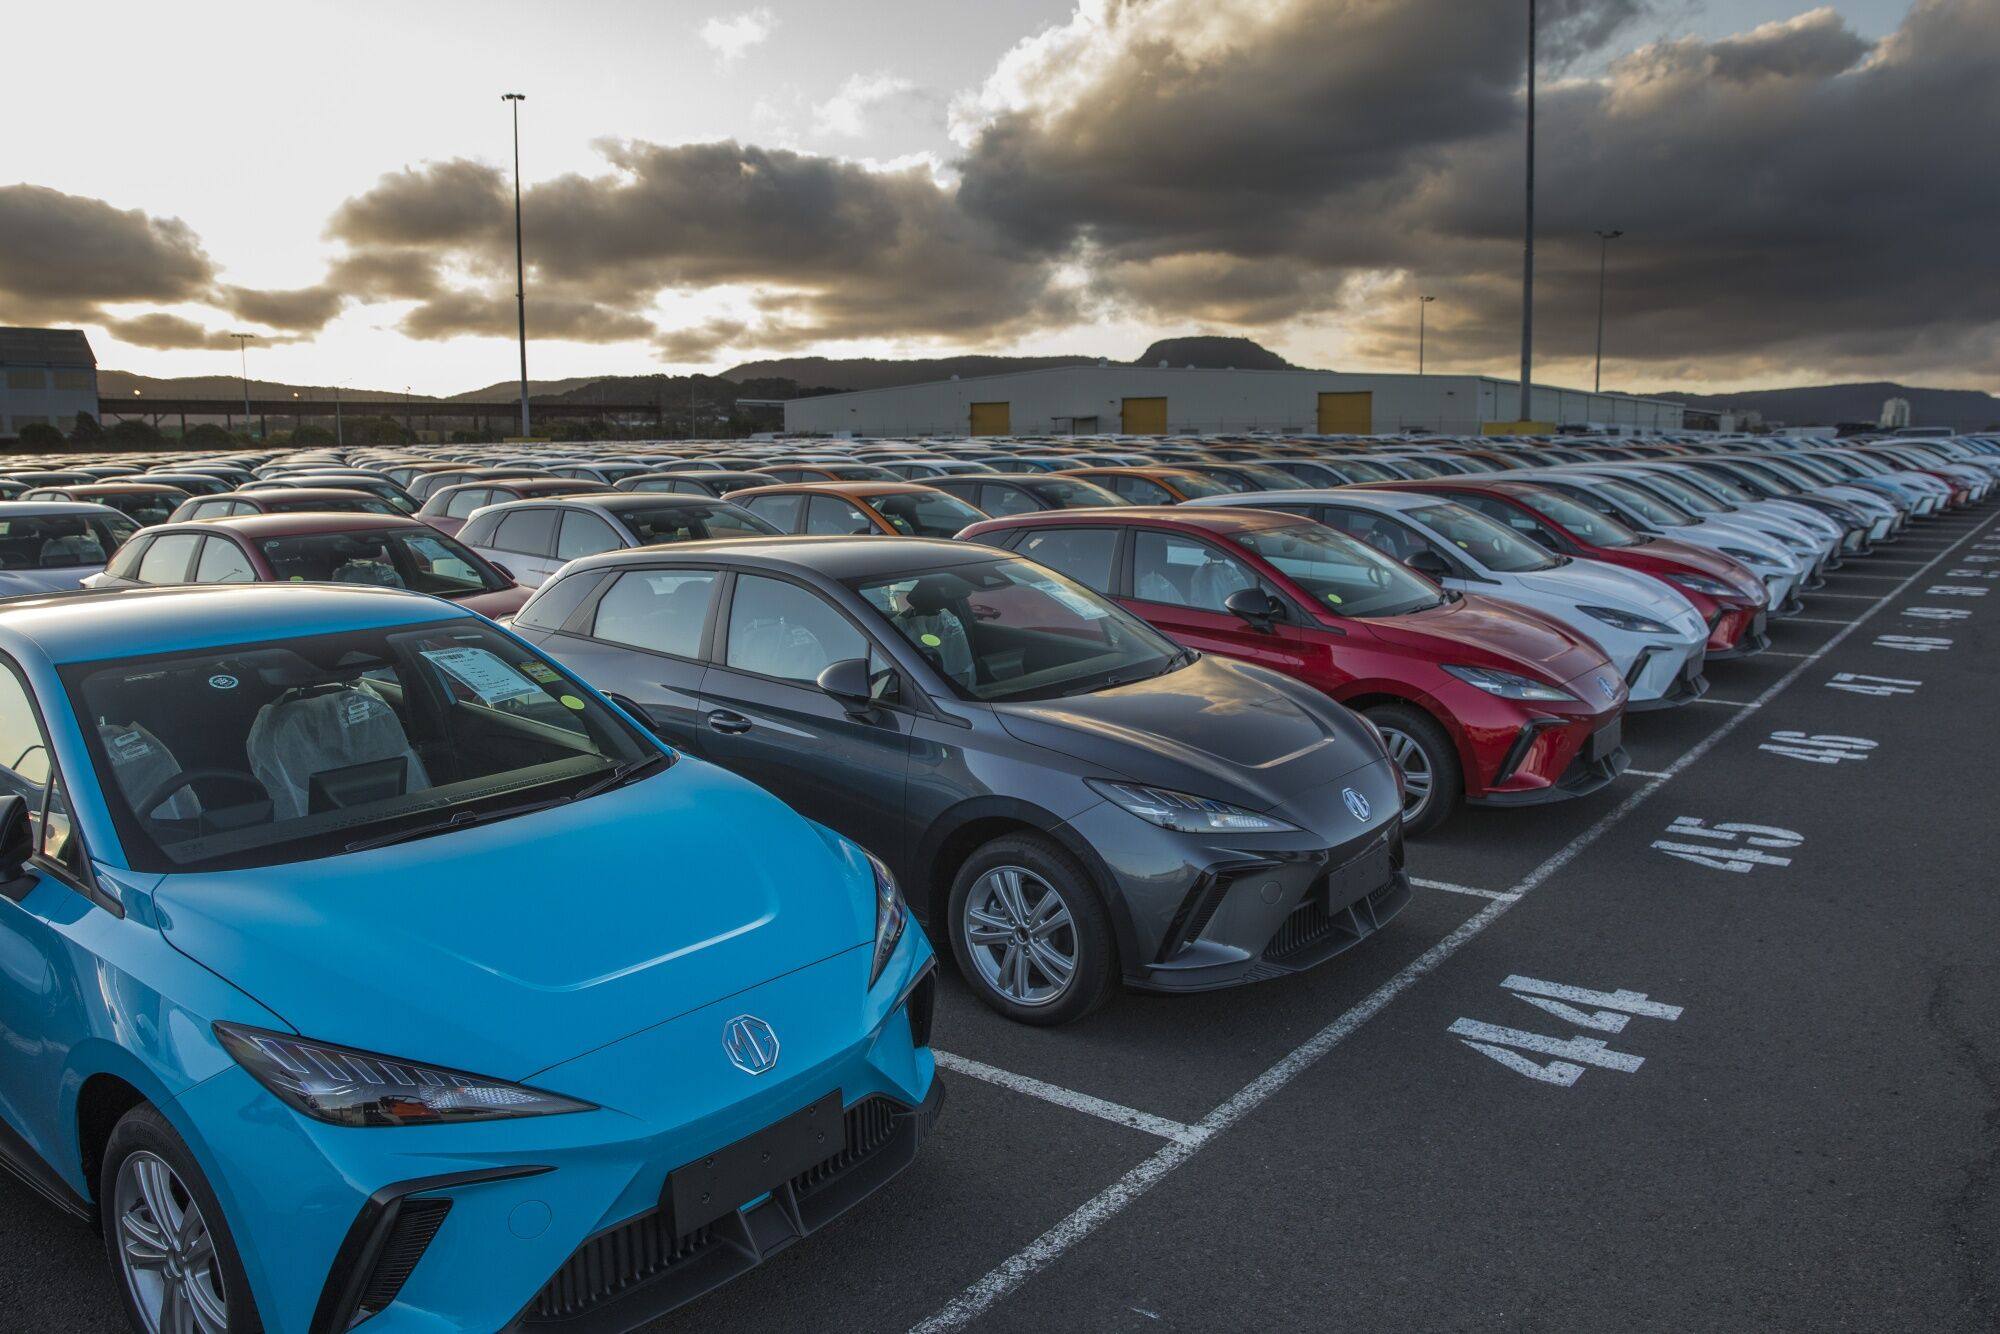 MG4 electric vehicles sit in a lot at Port Kembla vehicle terminal in Port Kembla, Australia, on September 2, 2023, following import from China. Photo: Bloomberg